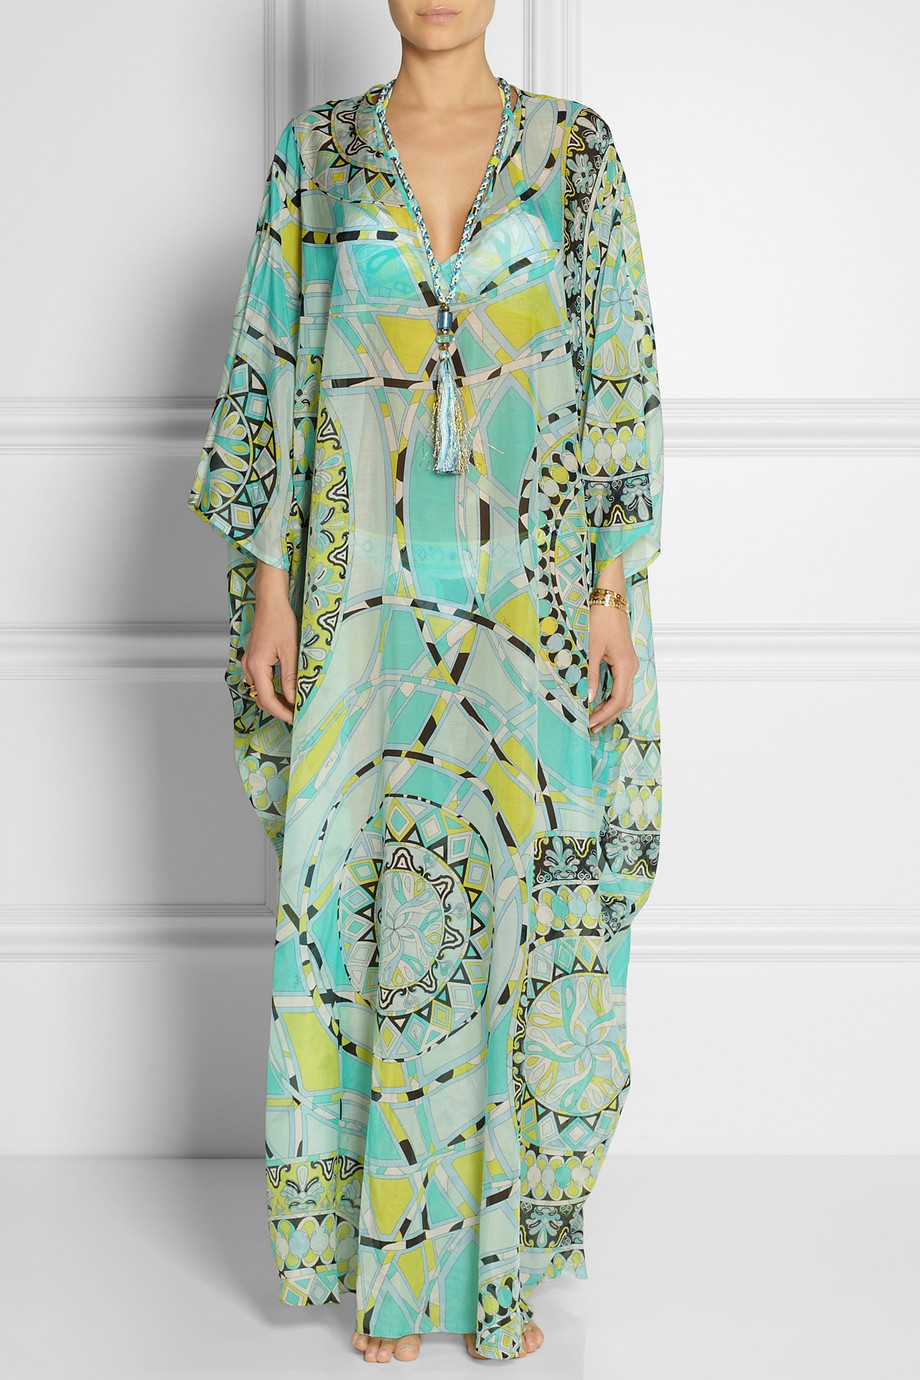 Lyst - Emilio Pucci Printed Cotton and Silkvoile Kaftan in Blue